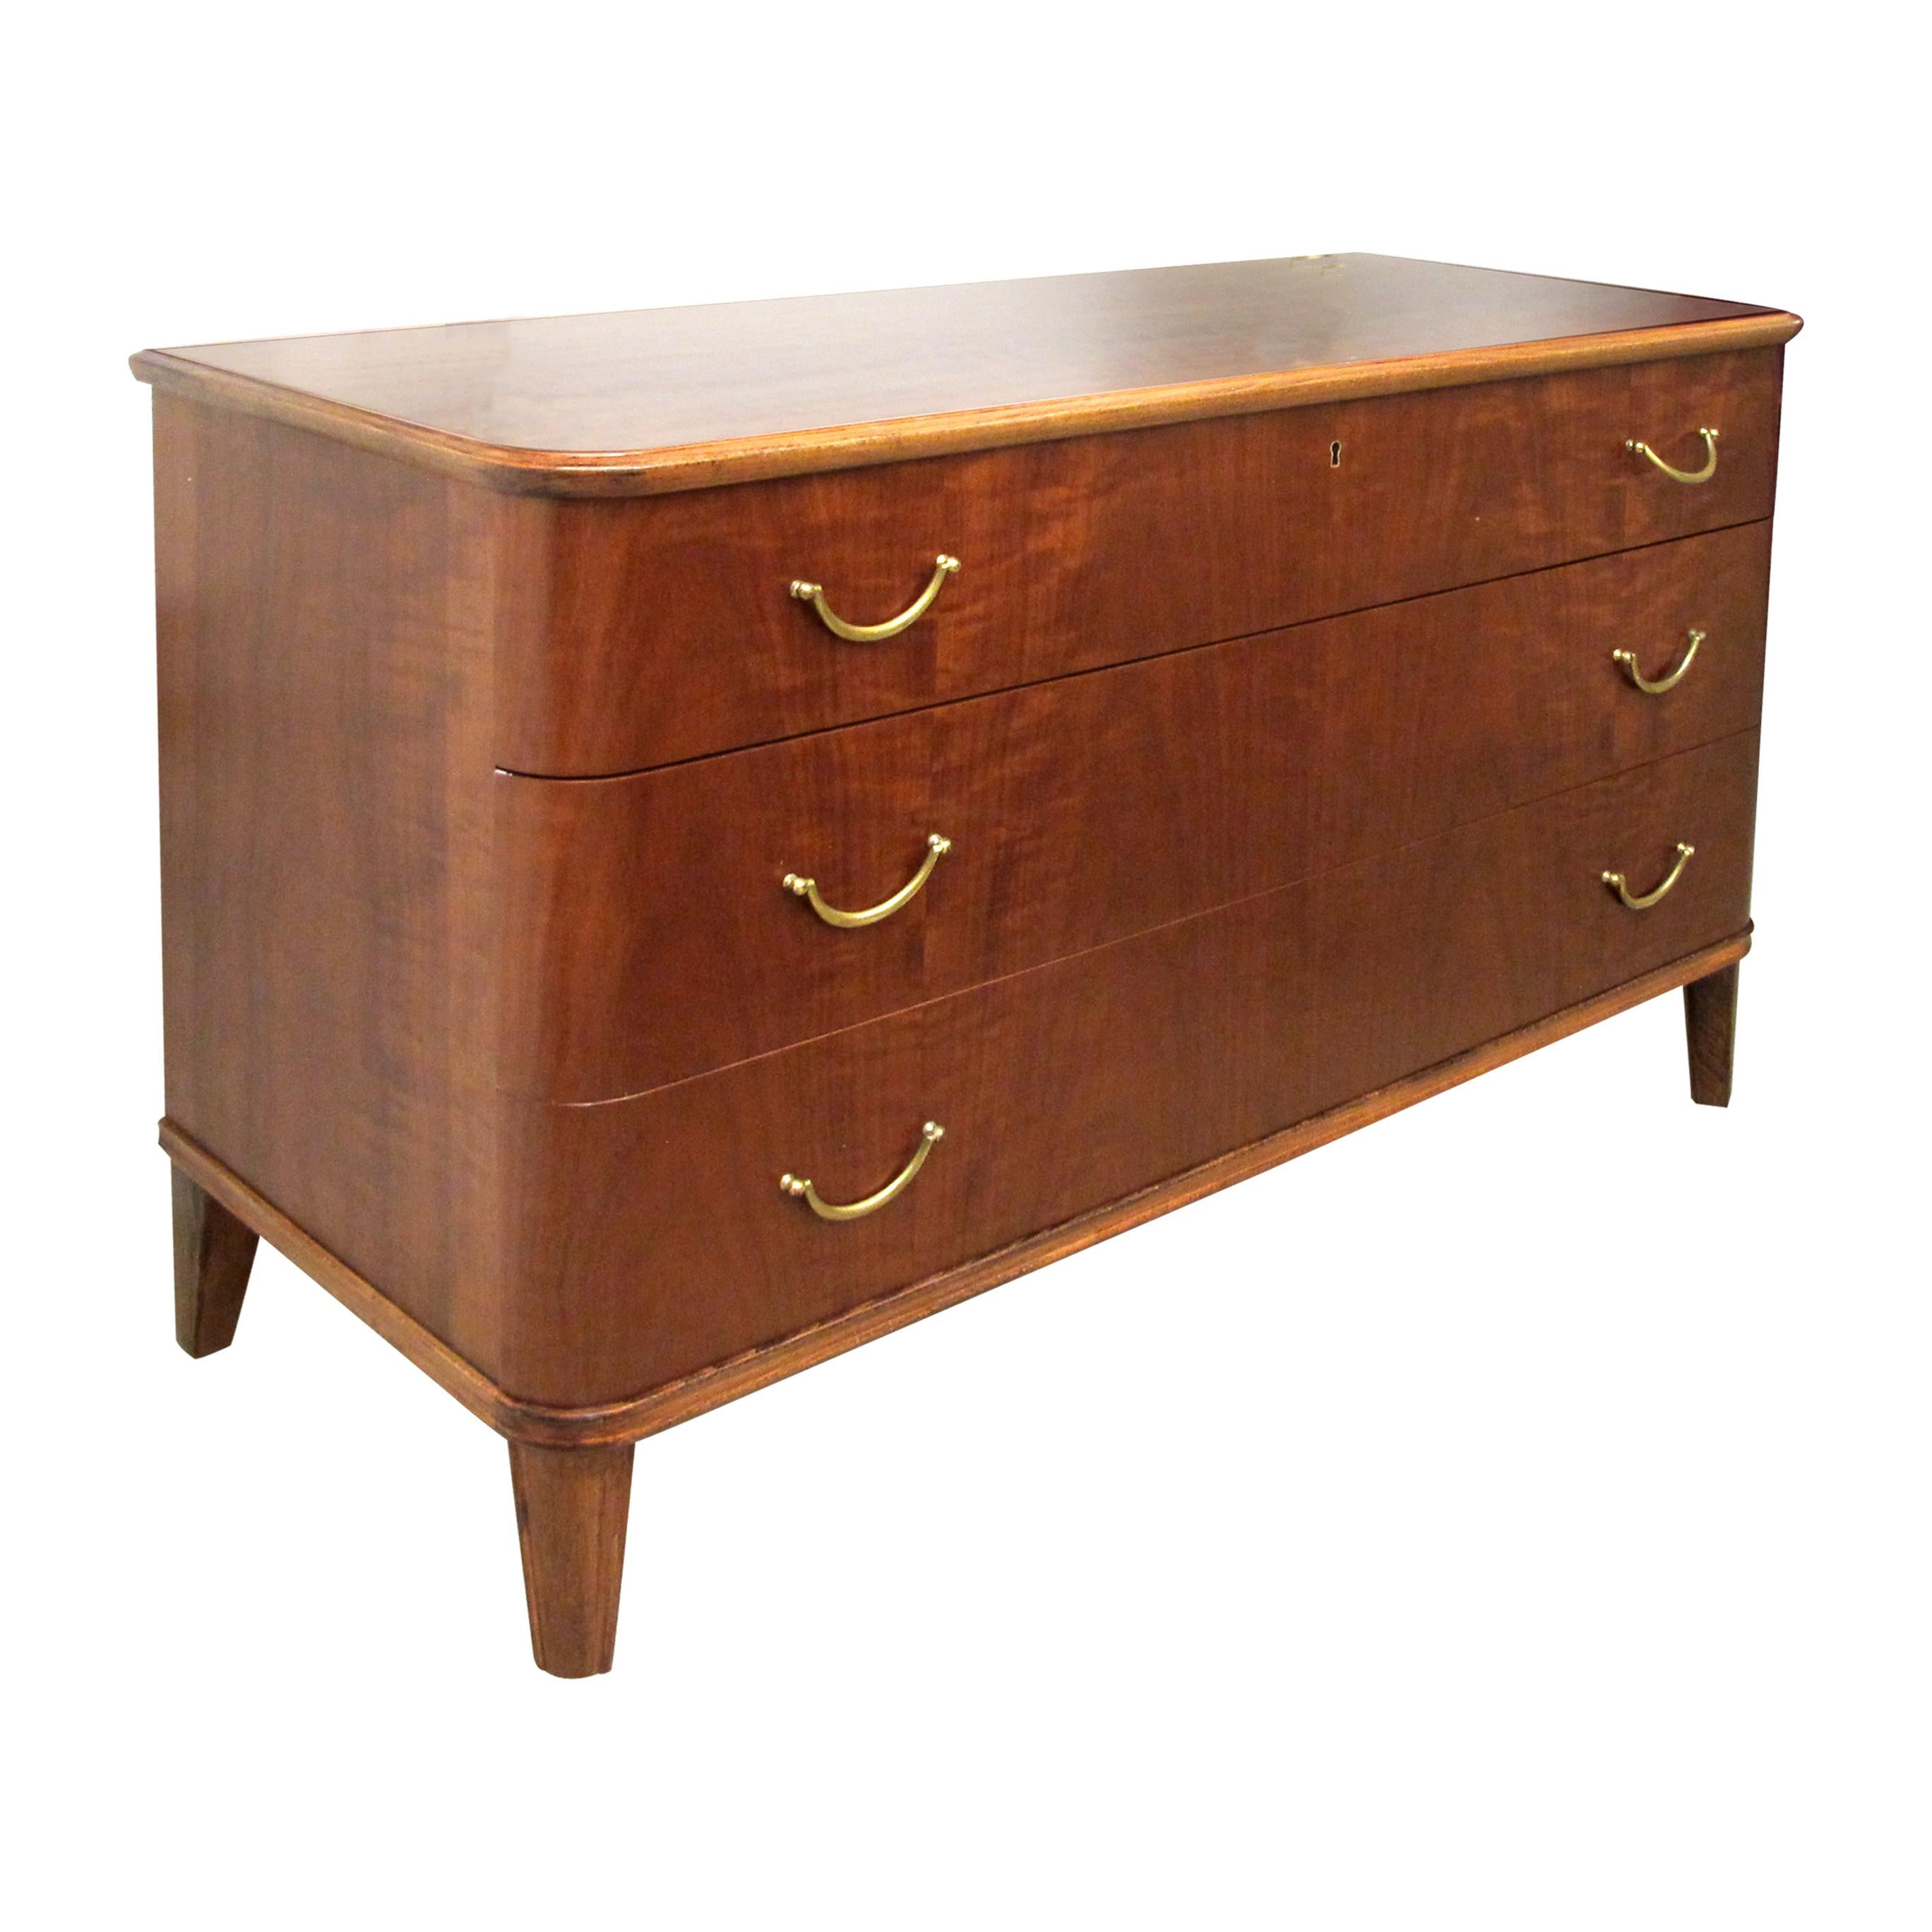 Art Deco 1940s Swedish Chest of Drawers with Walnut Veneers with Curved Edges For Sale